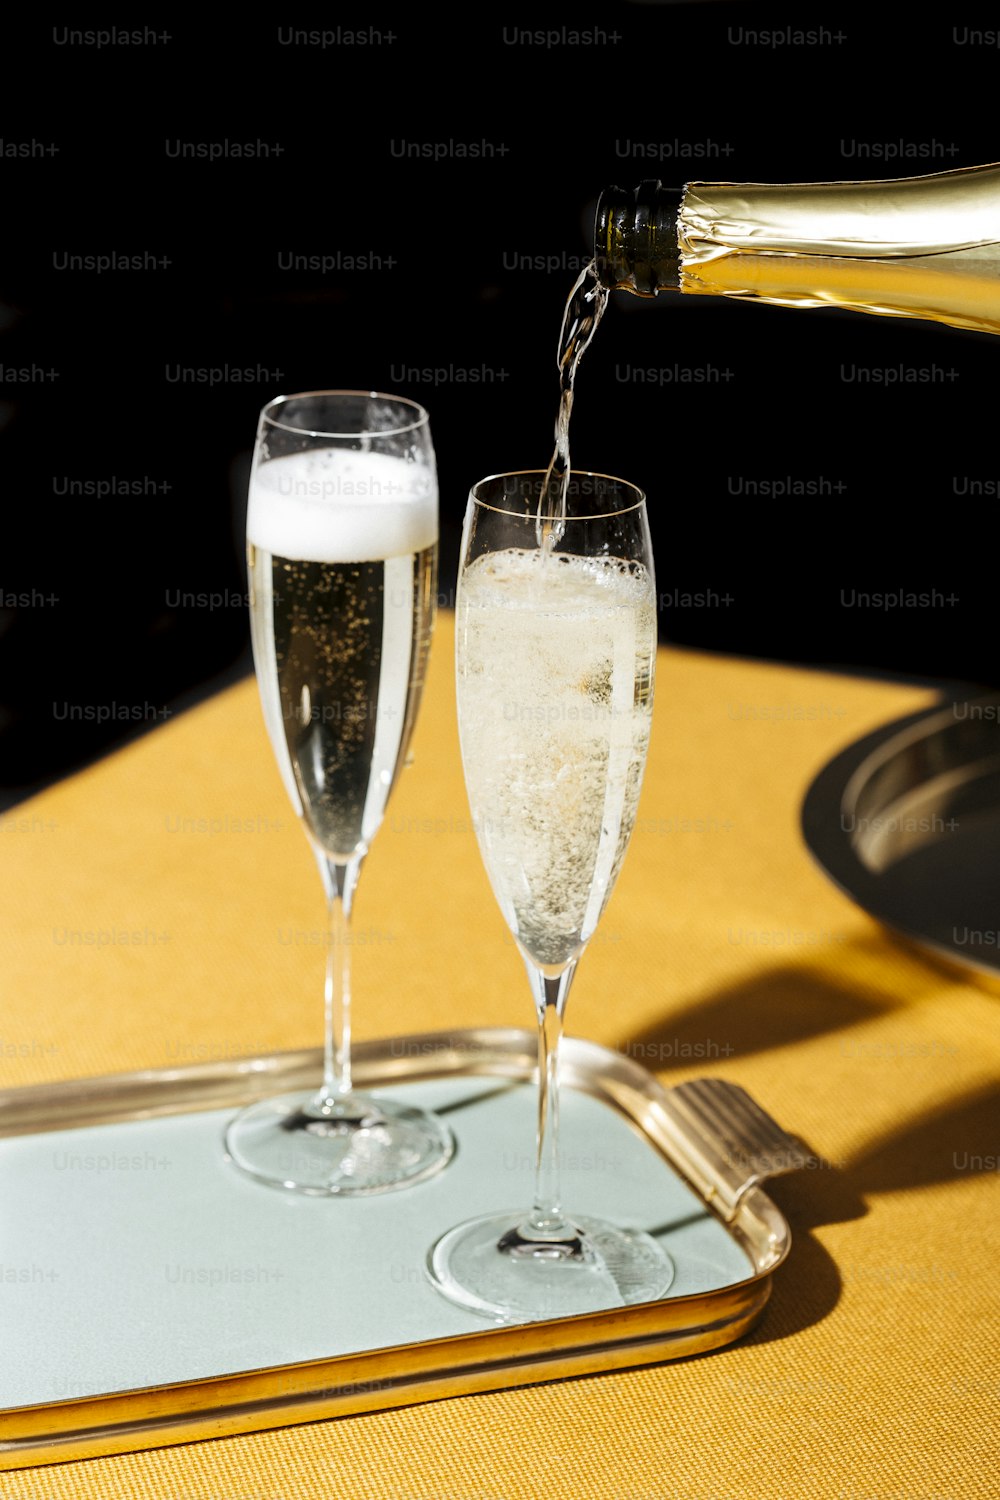 Flutes filled with sparkling Prosecco, in pop contemporary style. Prosecco is an italian white sparkling wine cultivated and produced in Valdobbiadene-Conegliano area.